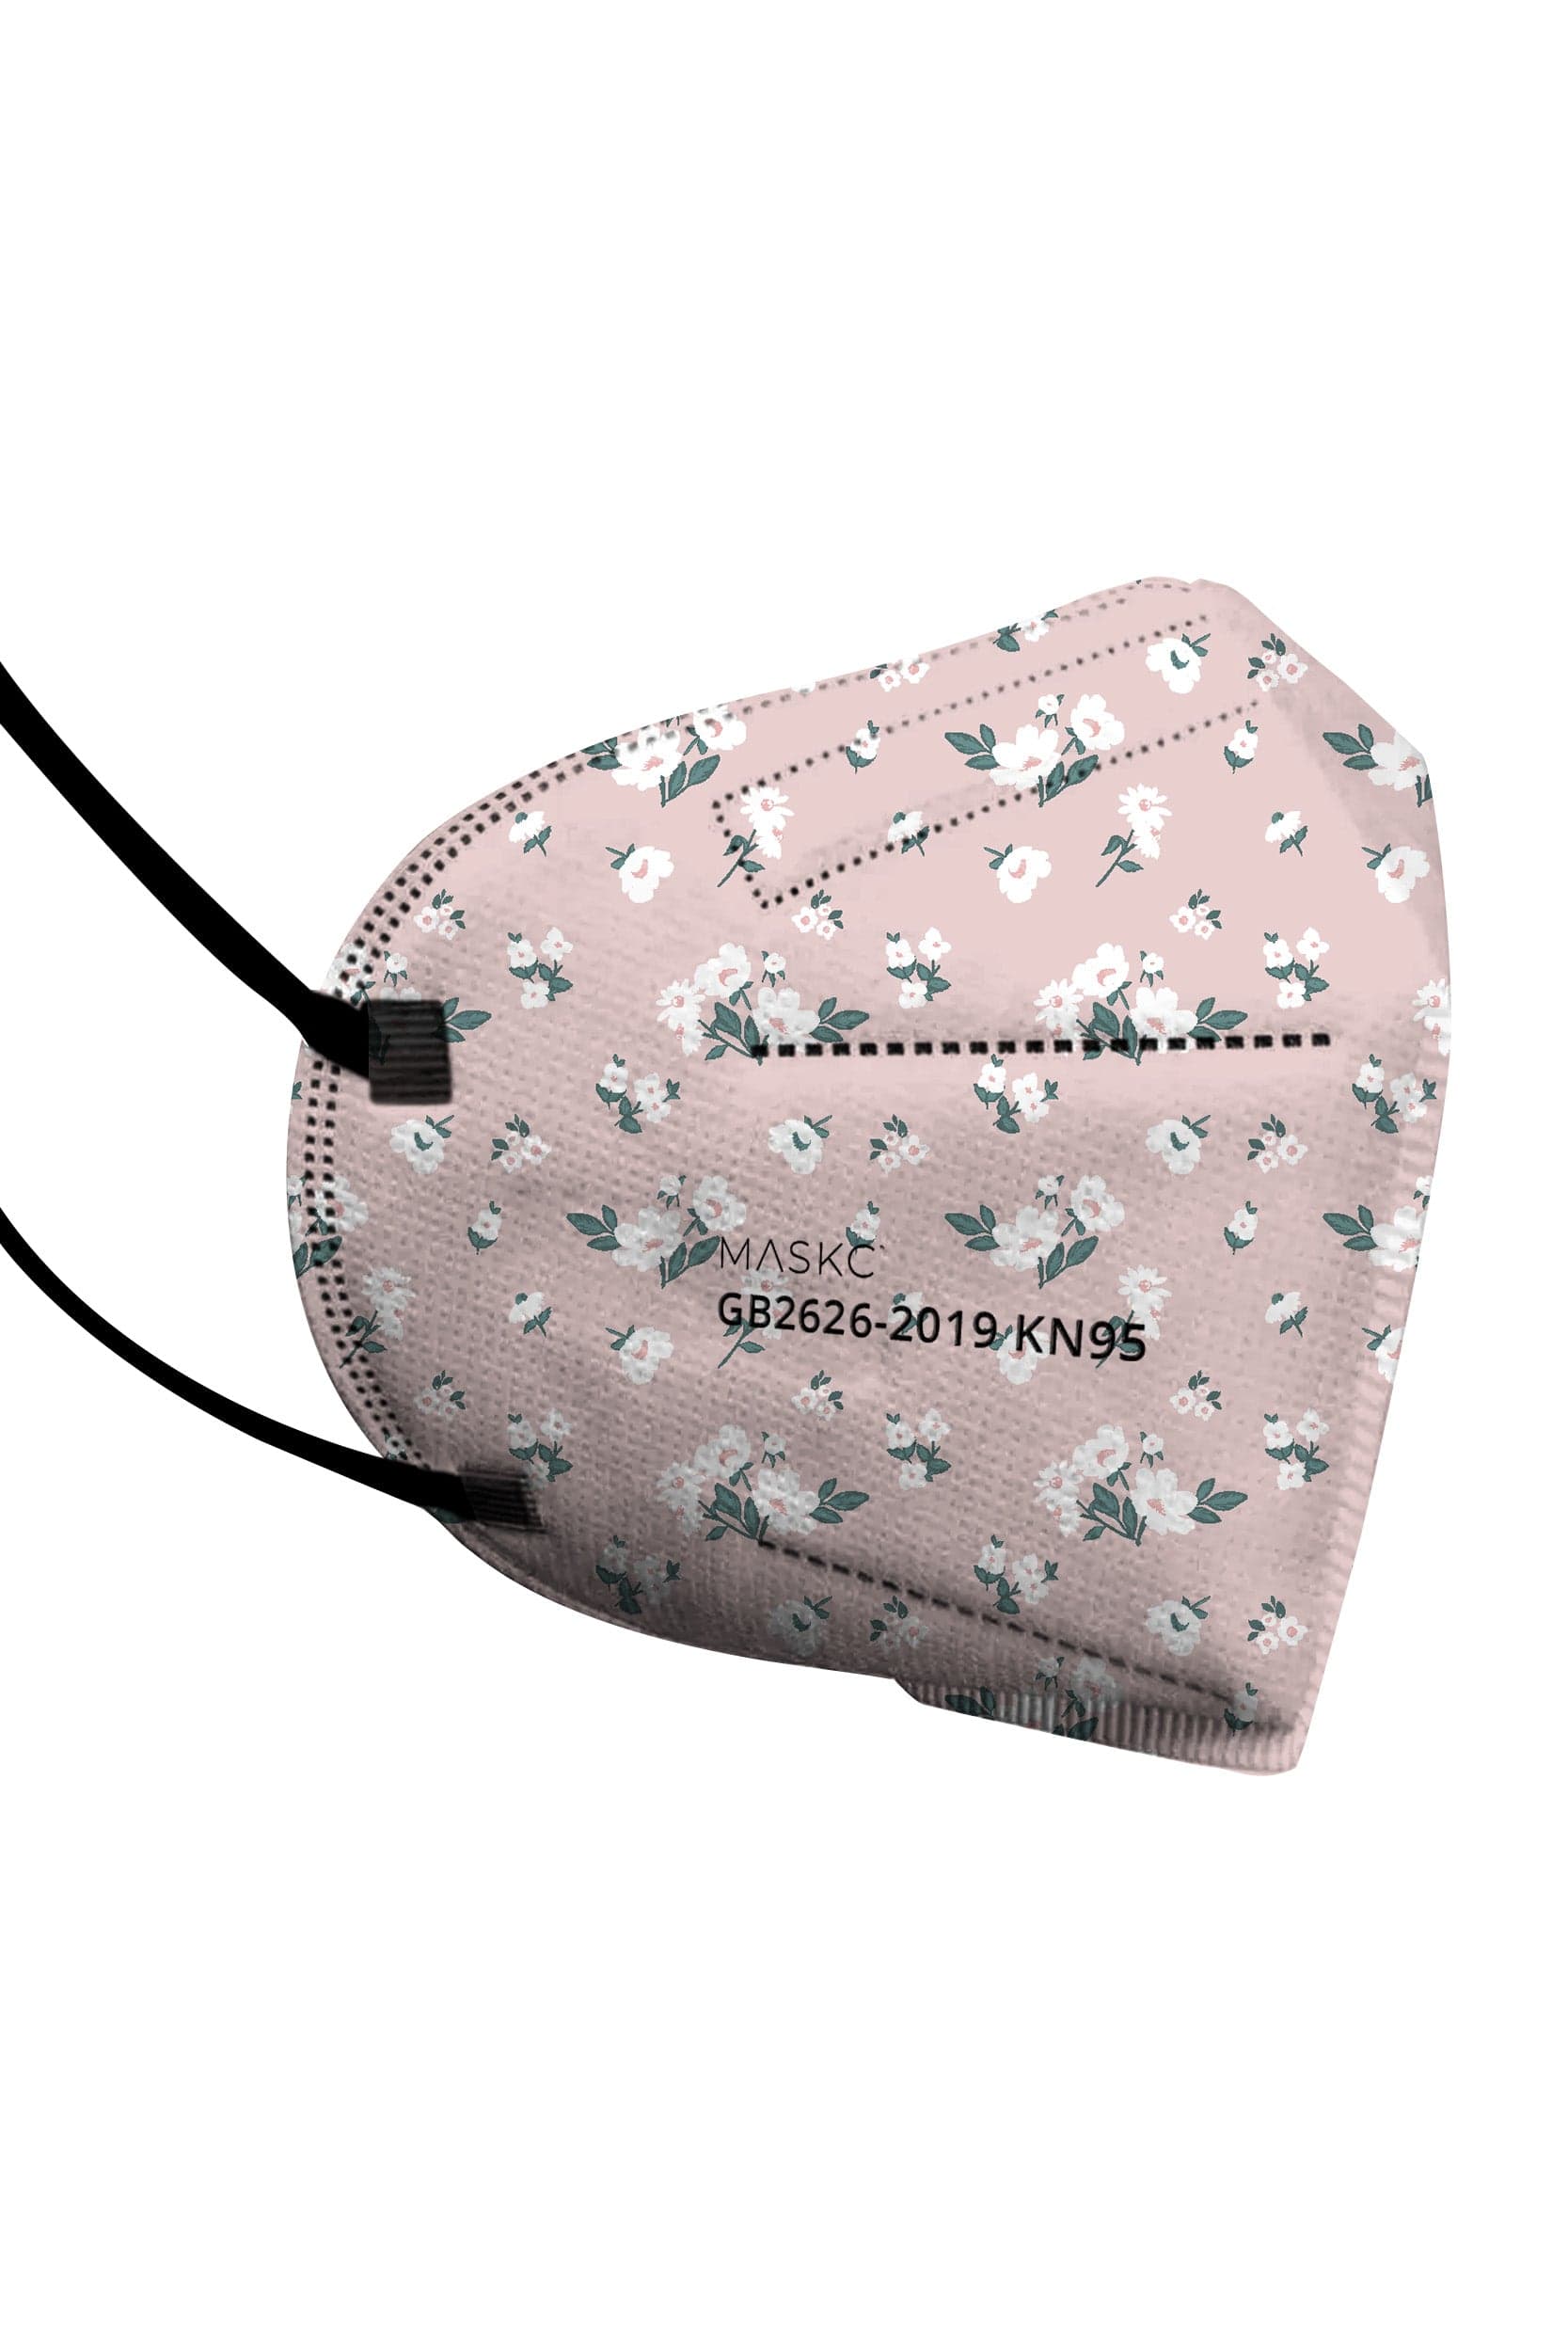 Stylish Light Pink Floral KN95 face mask, with soft black ear loops and high quality fabric. 